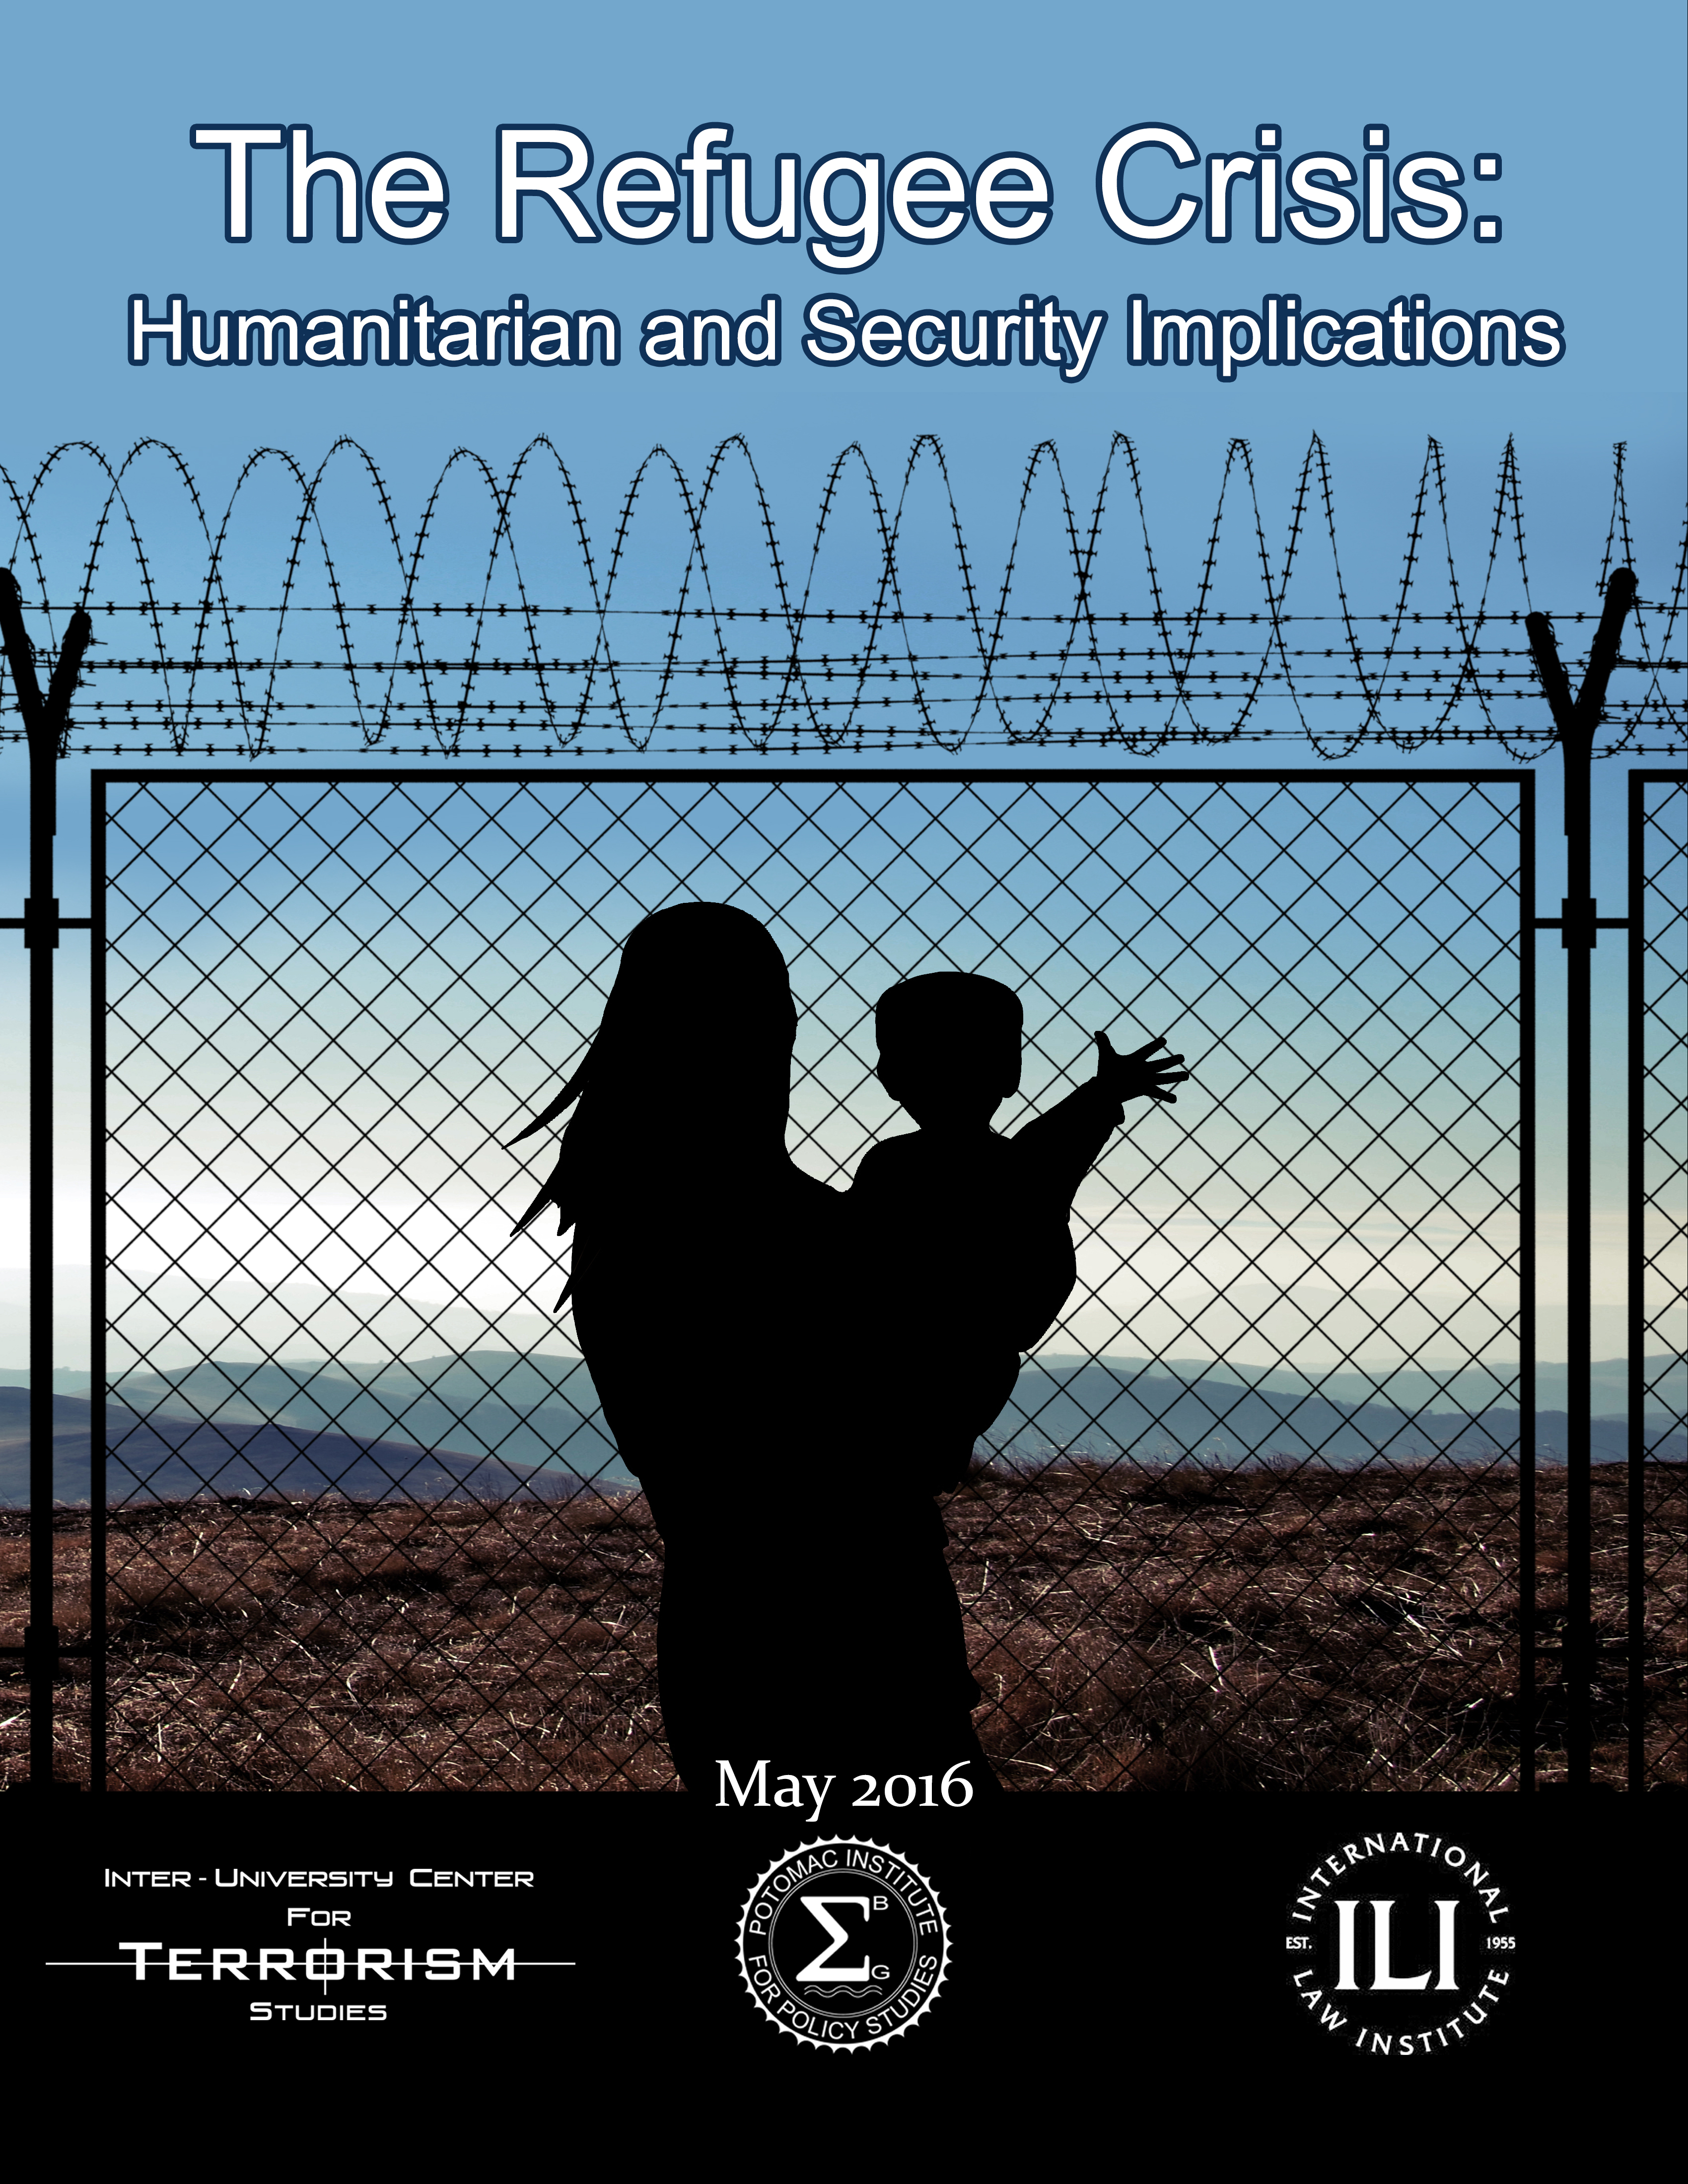 The Refugee Crisis: Humanitarian and Security Implications